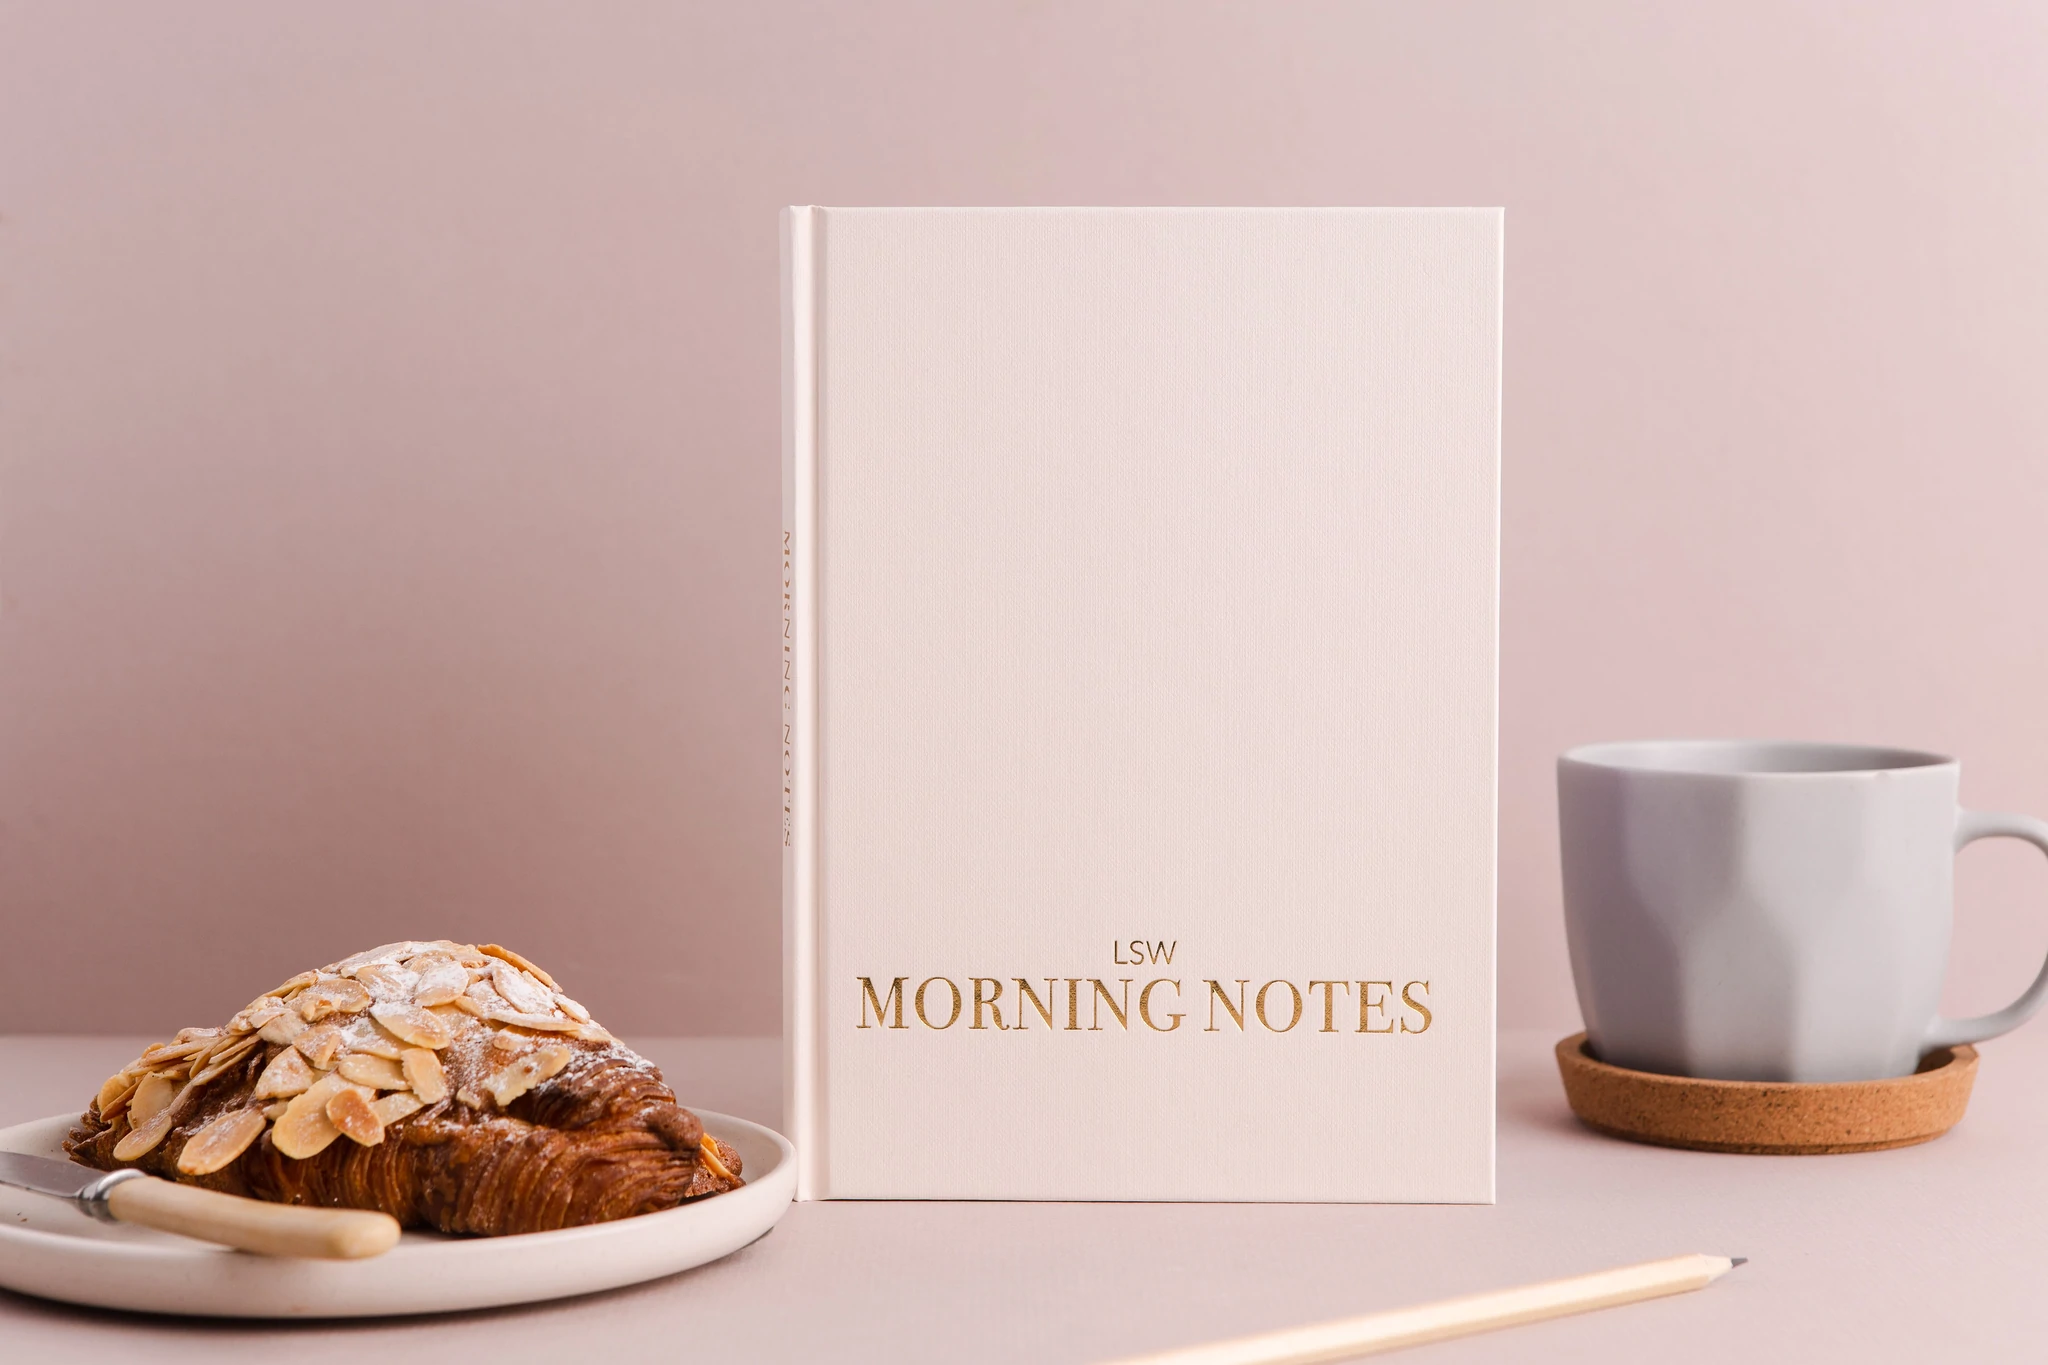 LSW London - Morning Notes